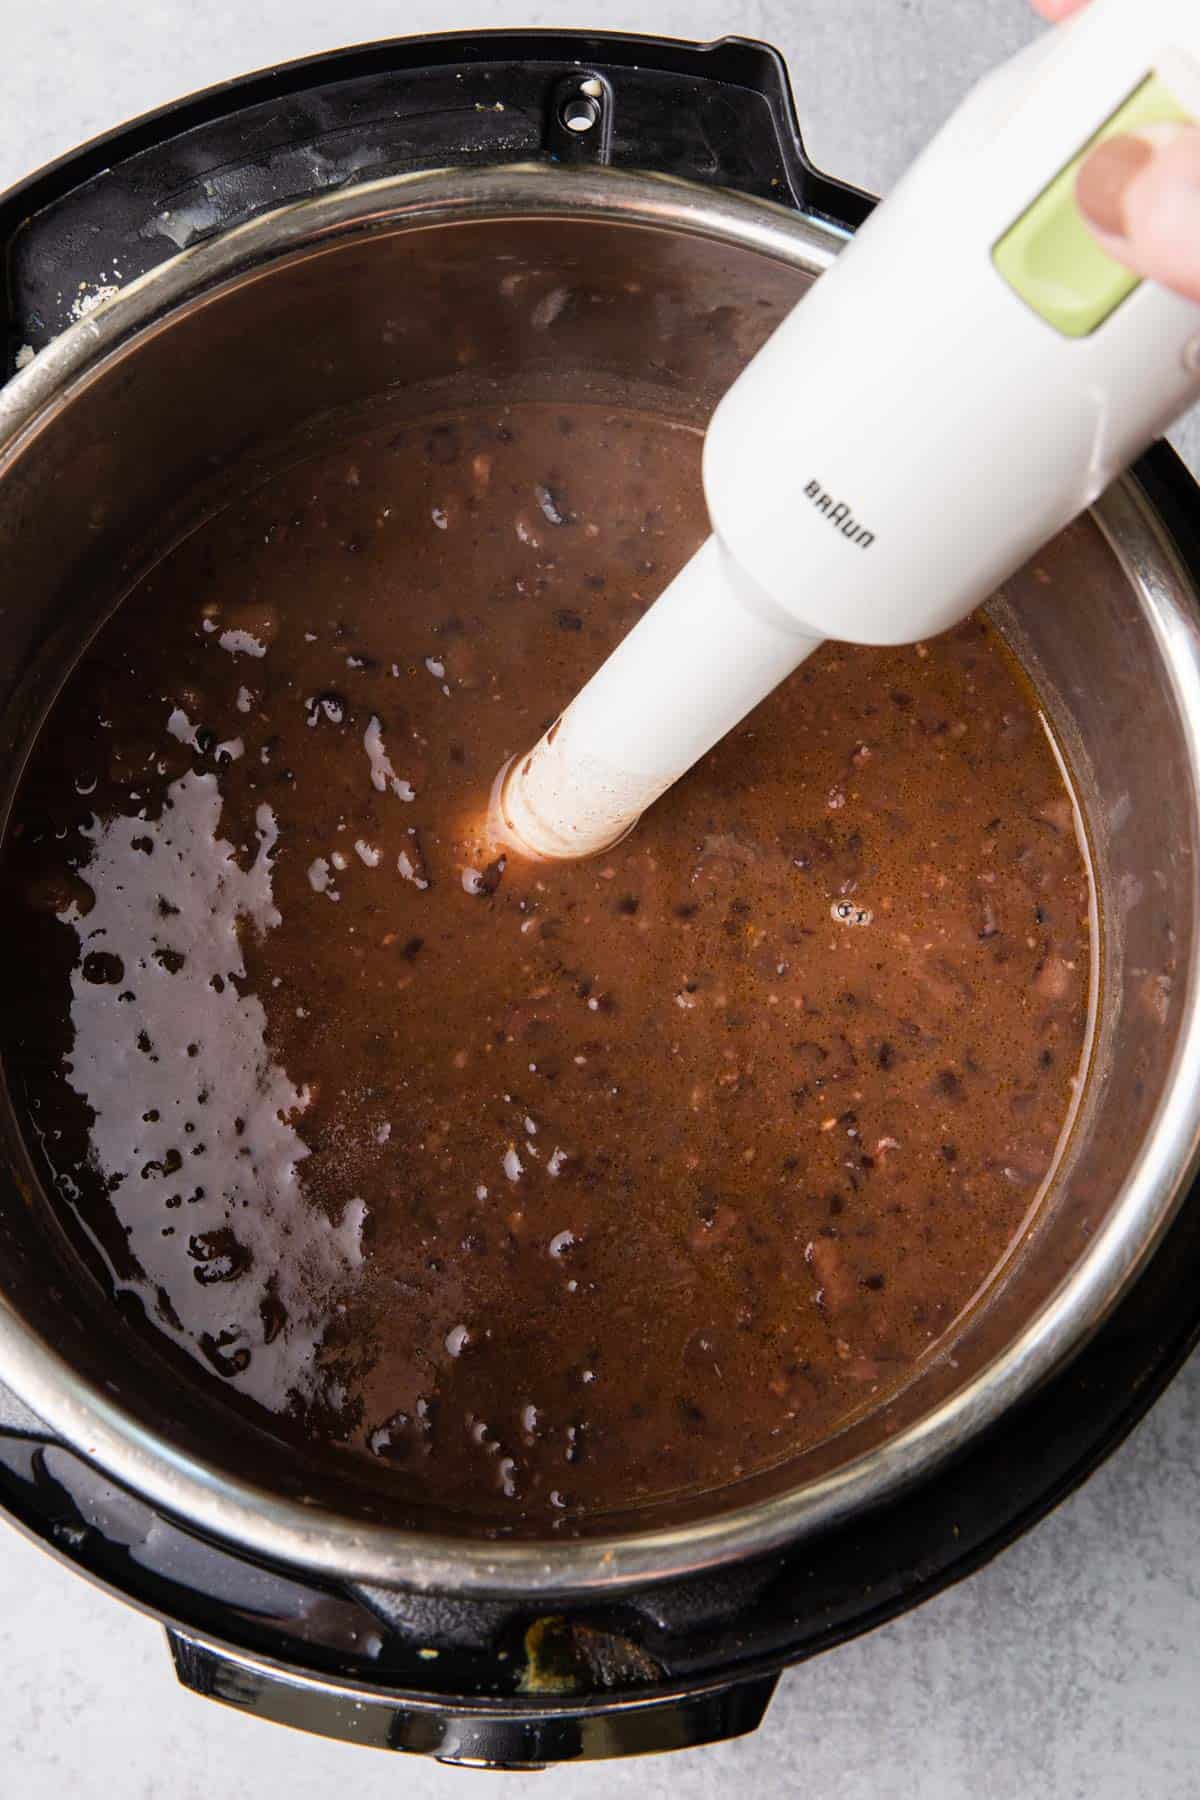 Immersion blender pureeing the soup in the instant pot.